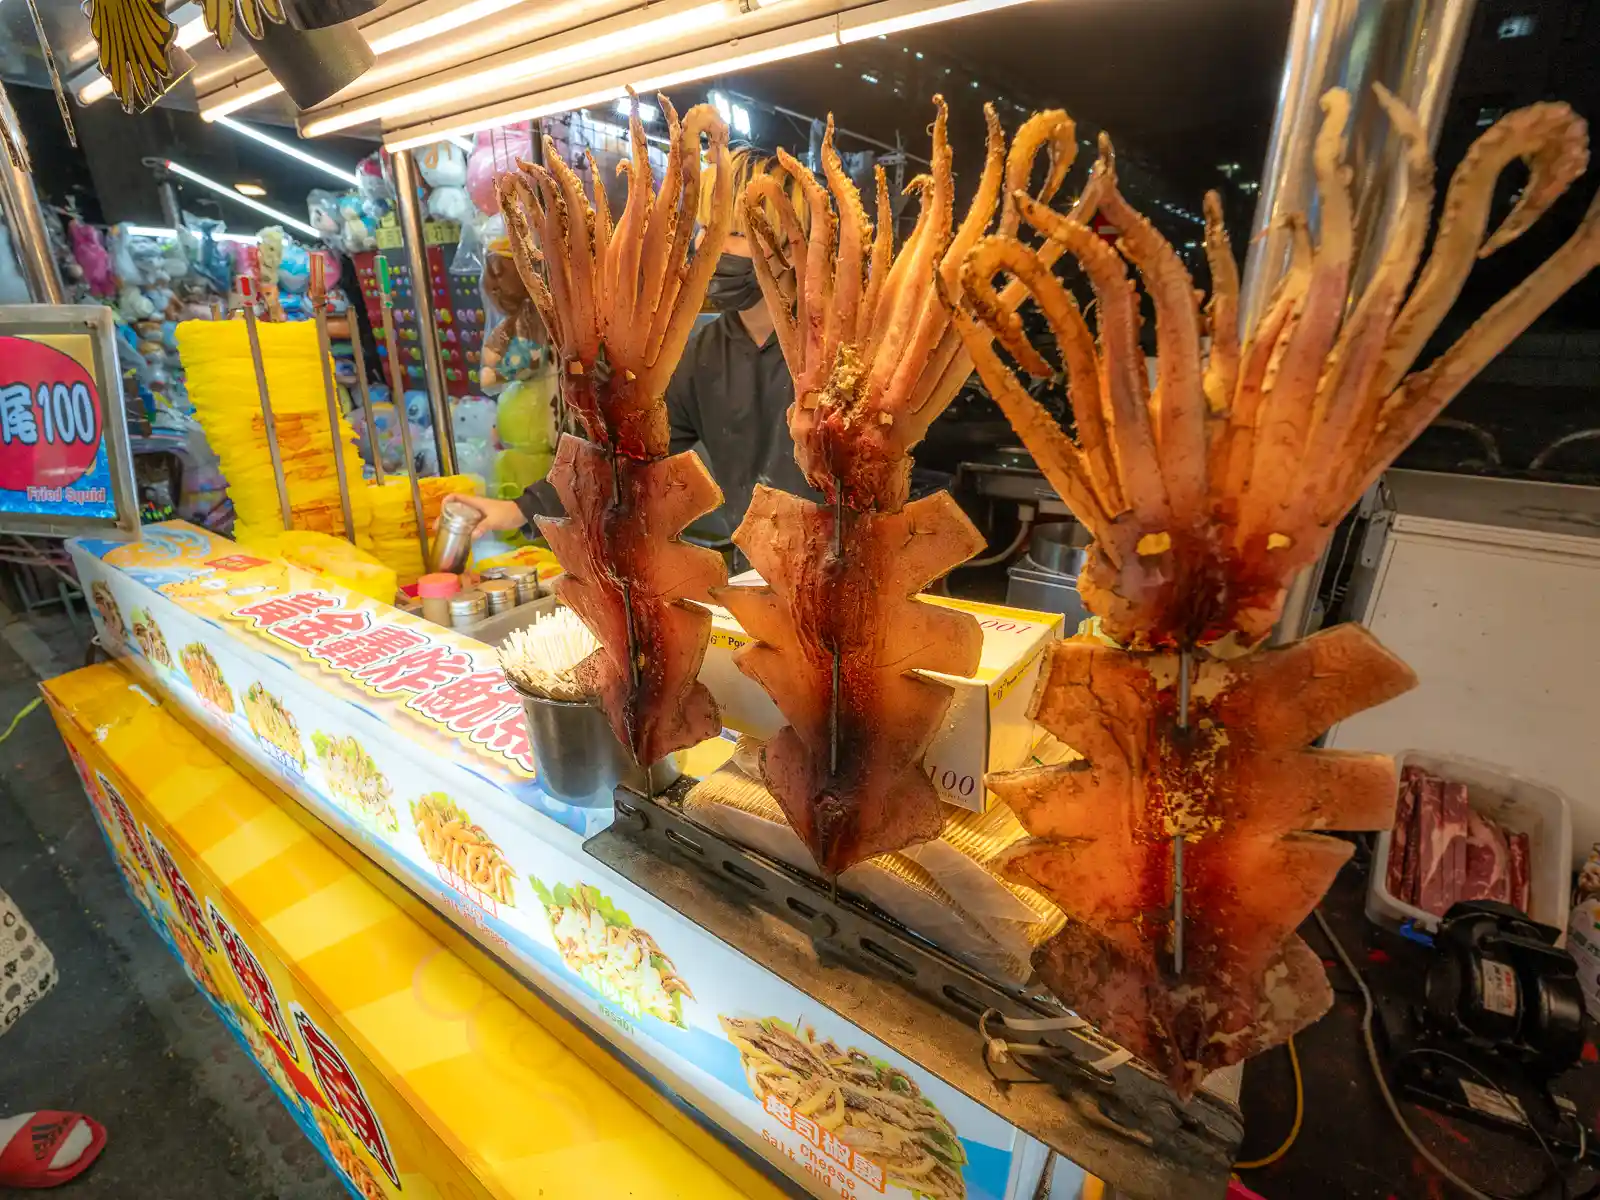 Squid are on display in a night market stand.